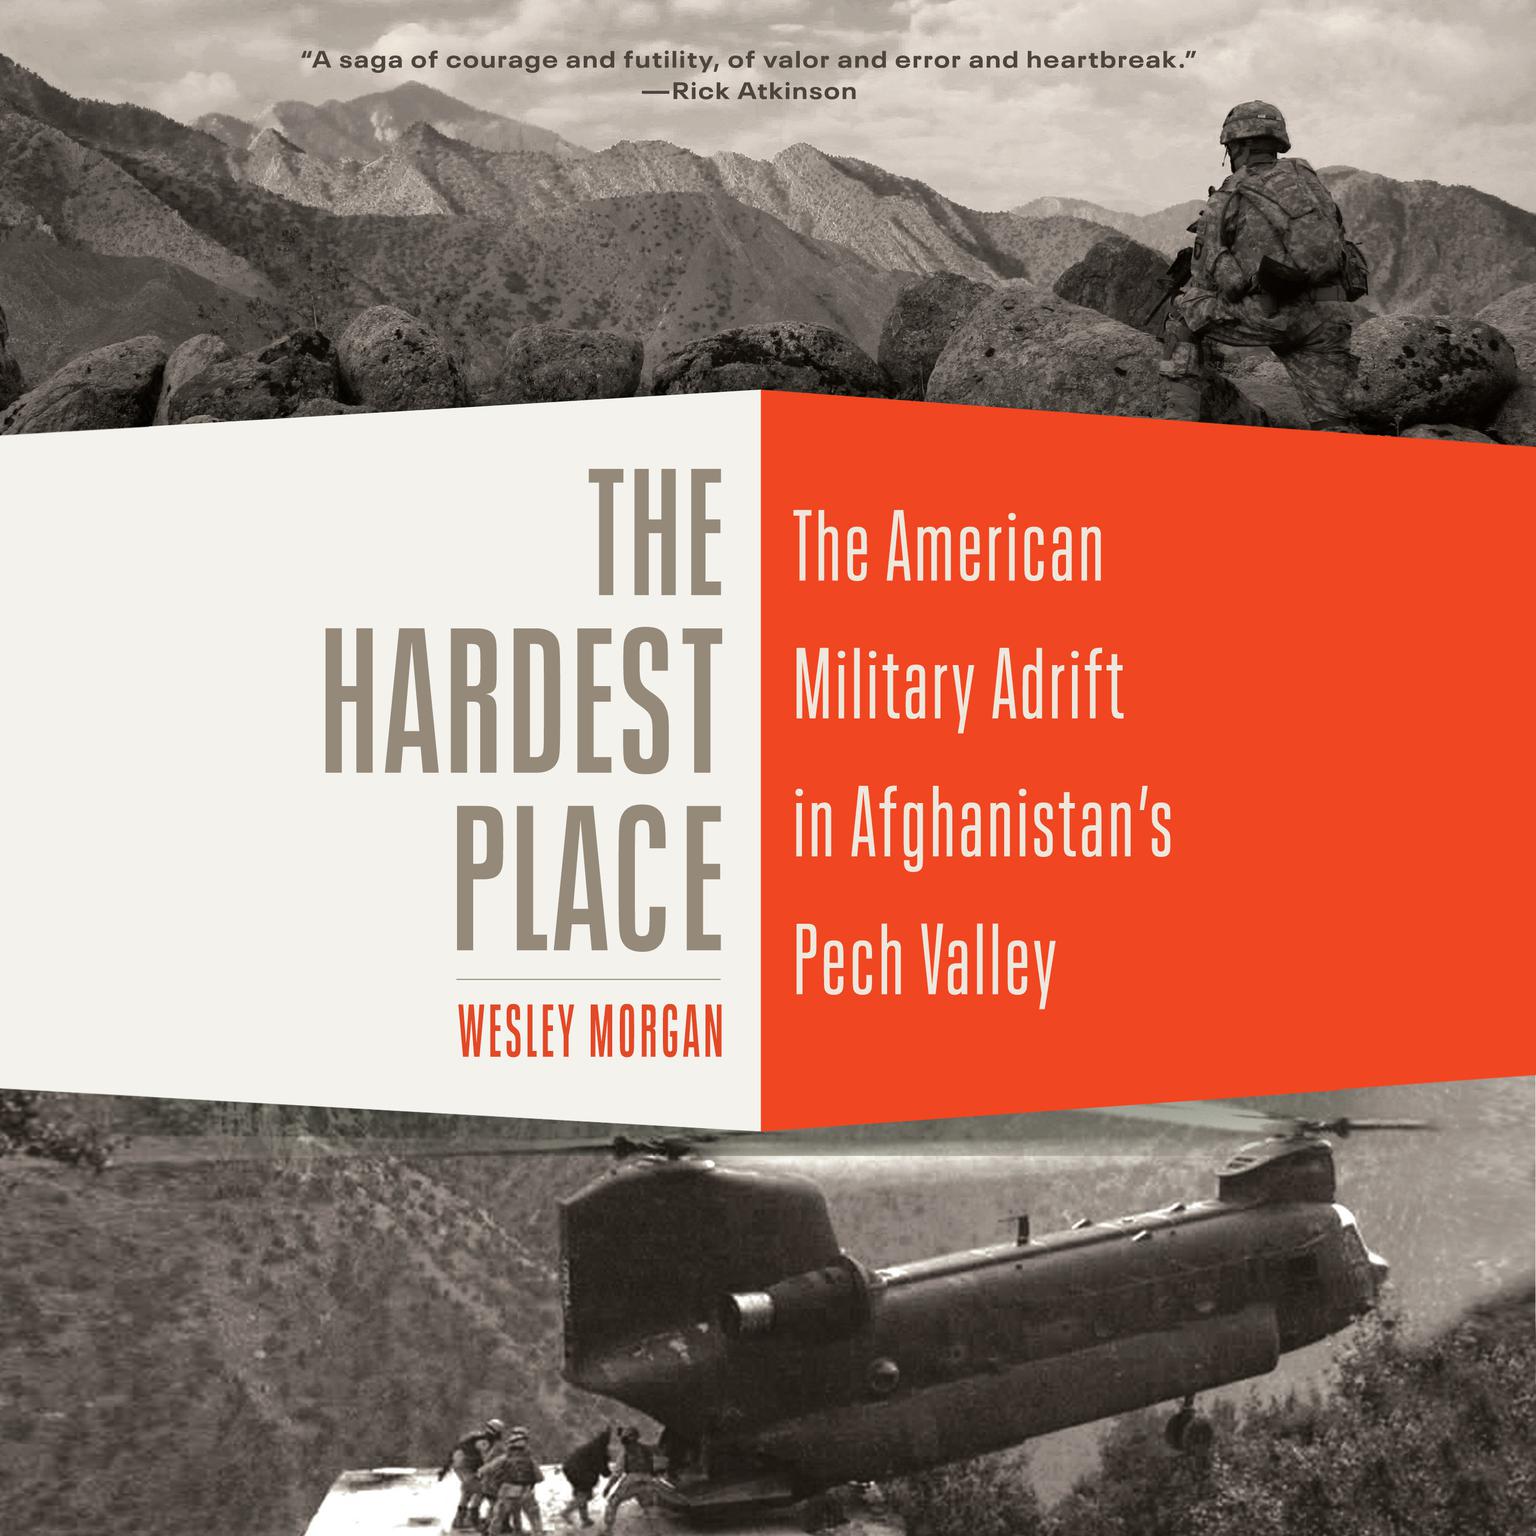 The Hardest Place: The American Military Adrift in Afghanistans Pech Valley Audiobook, by Wesley Morgan